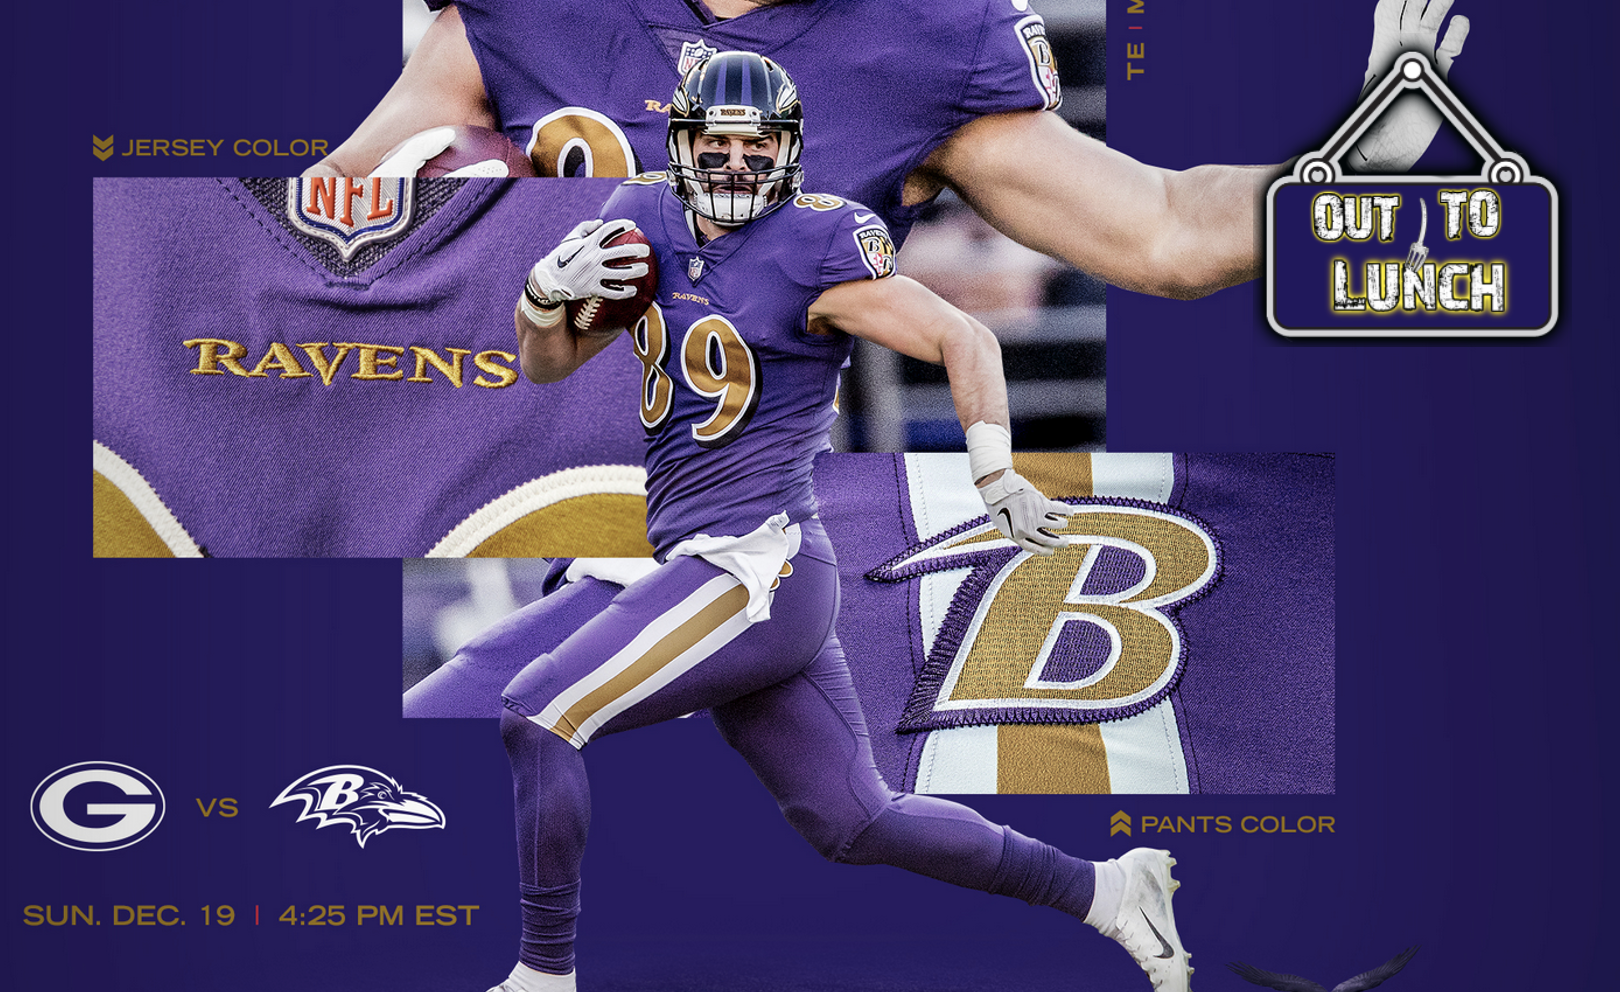 Baltimore Ravens: Out to Lunch - Color Rush Gives Ravens Boost?